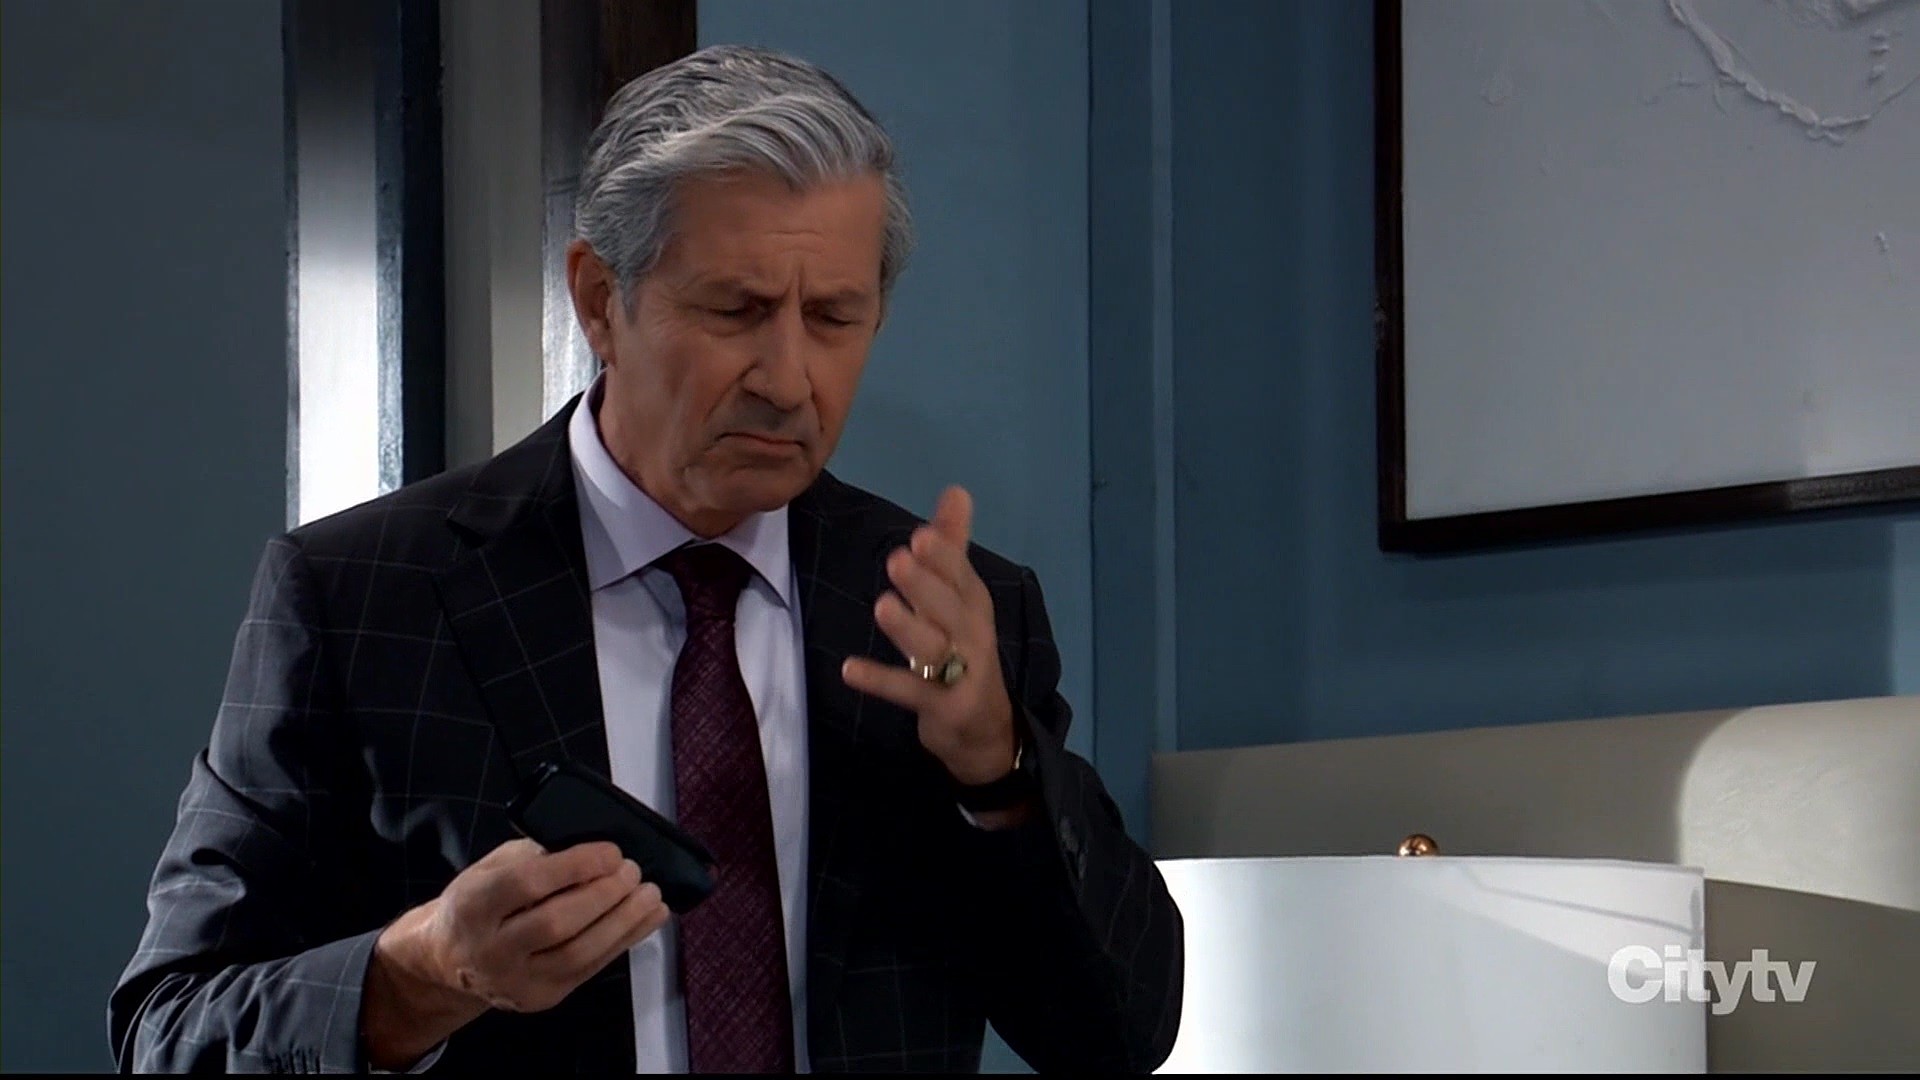 GH/Victor (Charles Shaughnessy) controls Holly Sutton's (Emma Samms) mind?